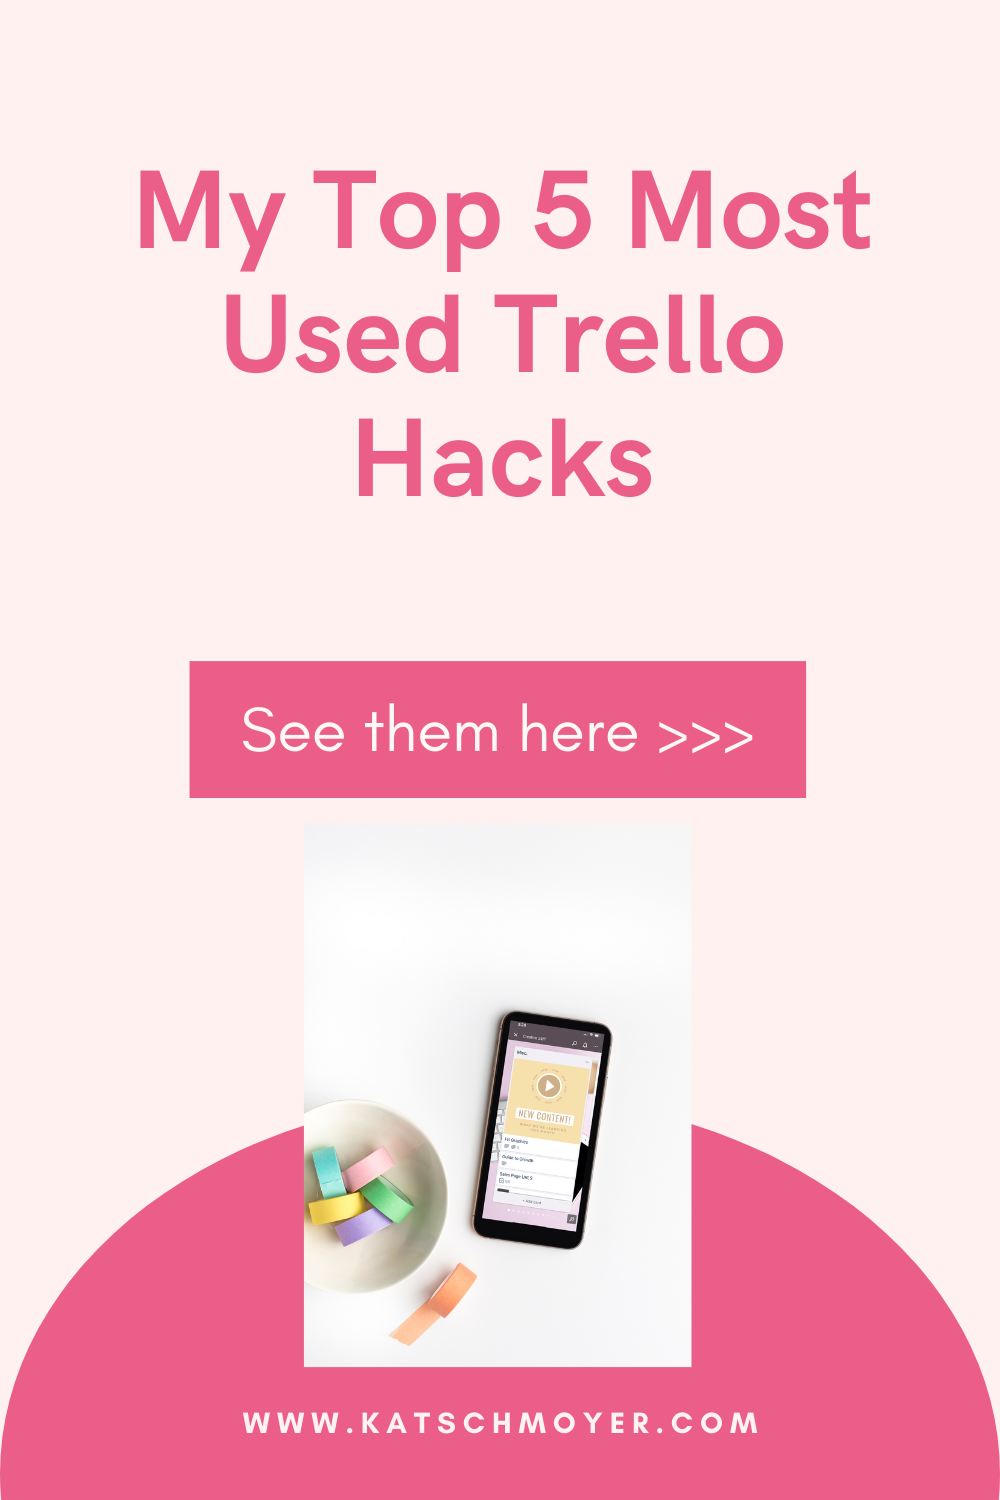 Top 5 most used trello hacks from Kat Schmoyer